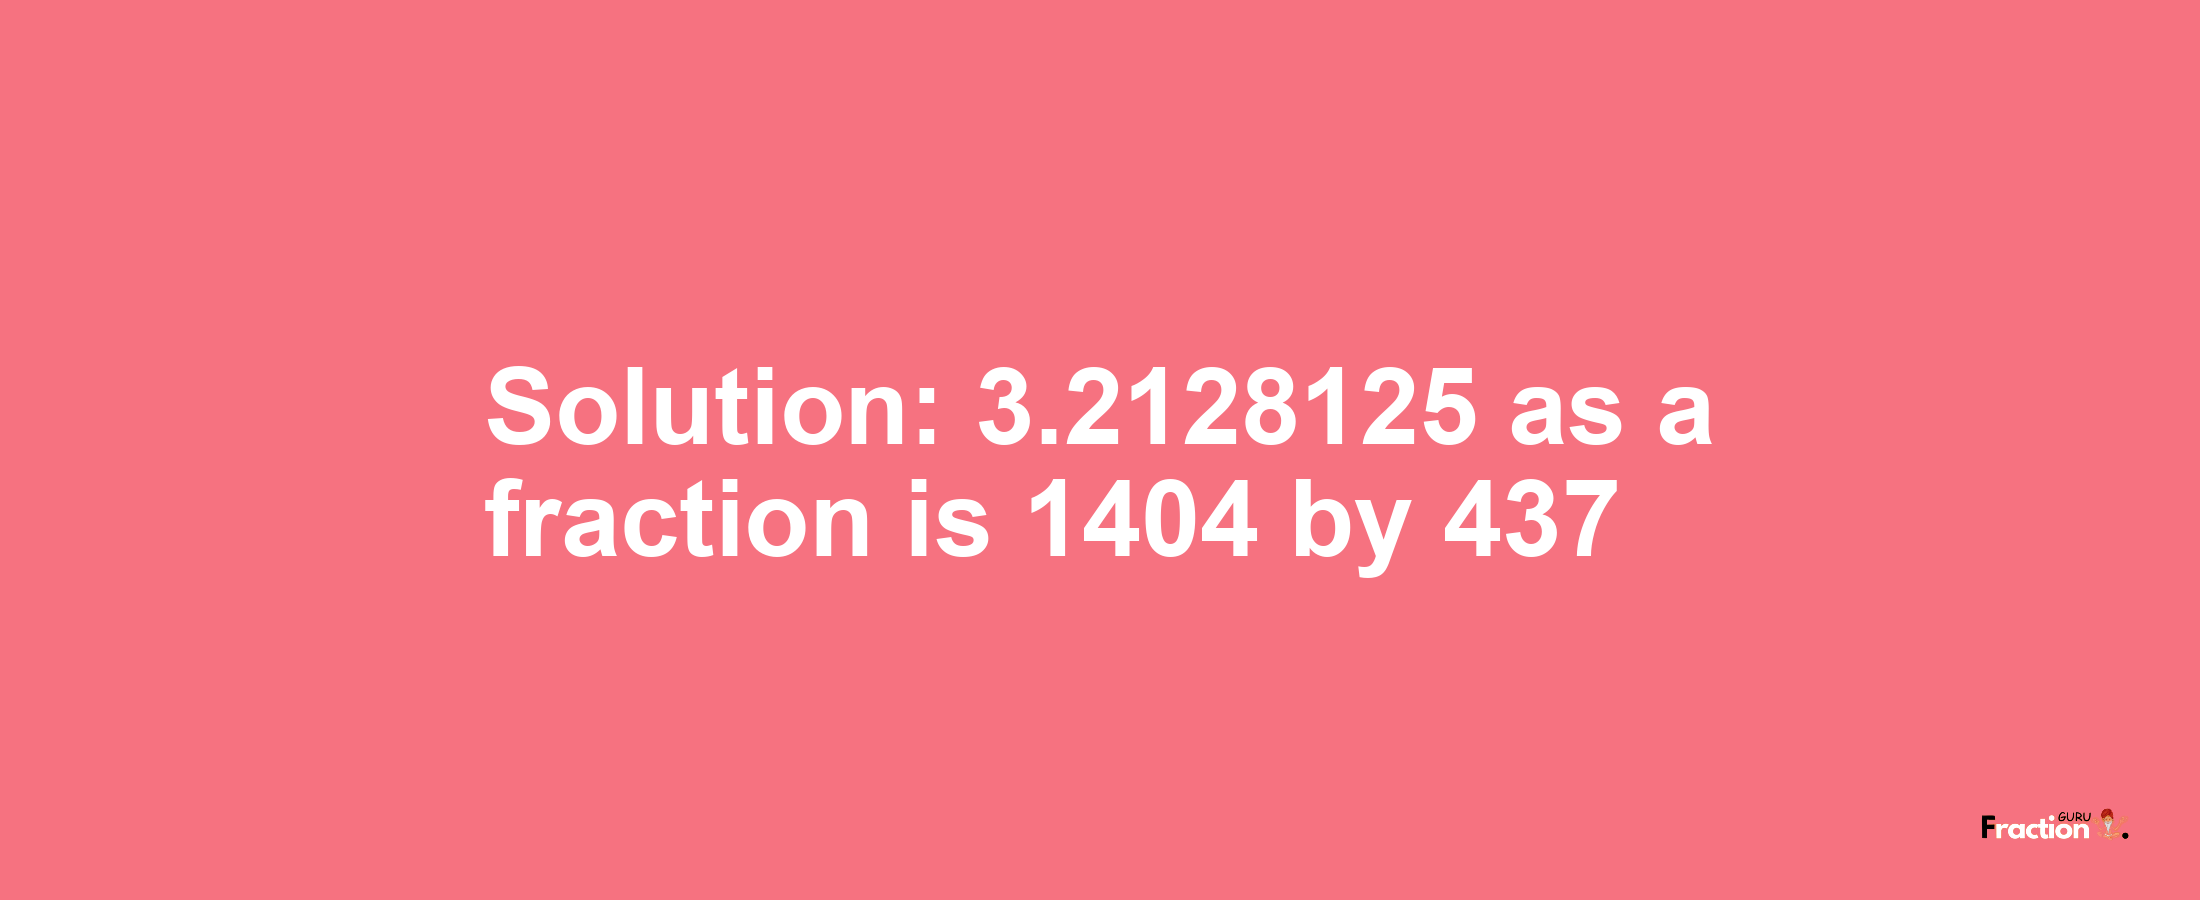 Solution:3.2128125 as a fraction is 1404/437